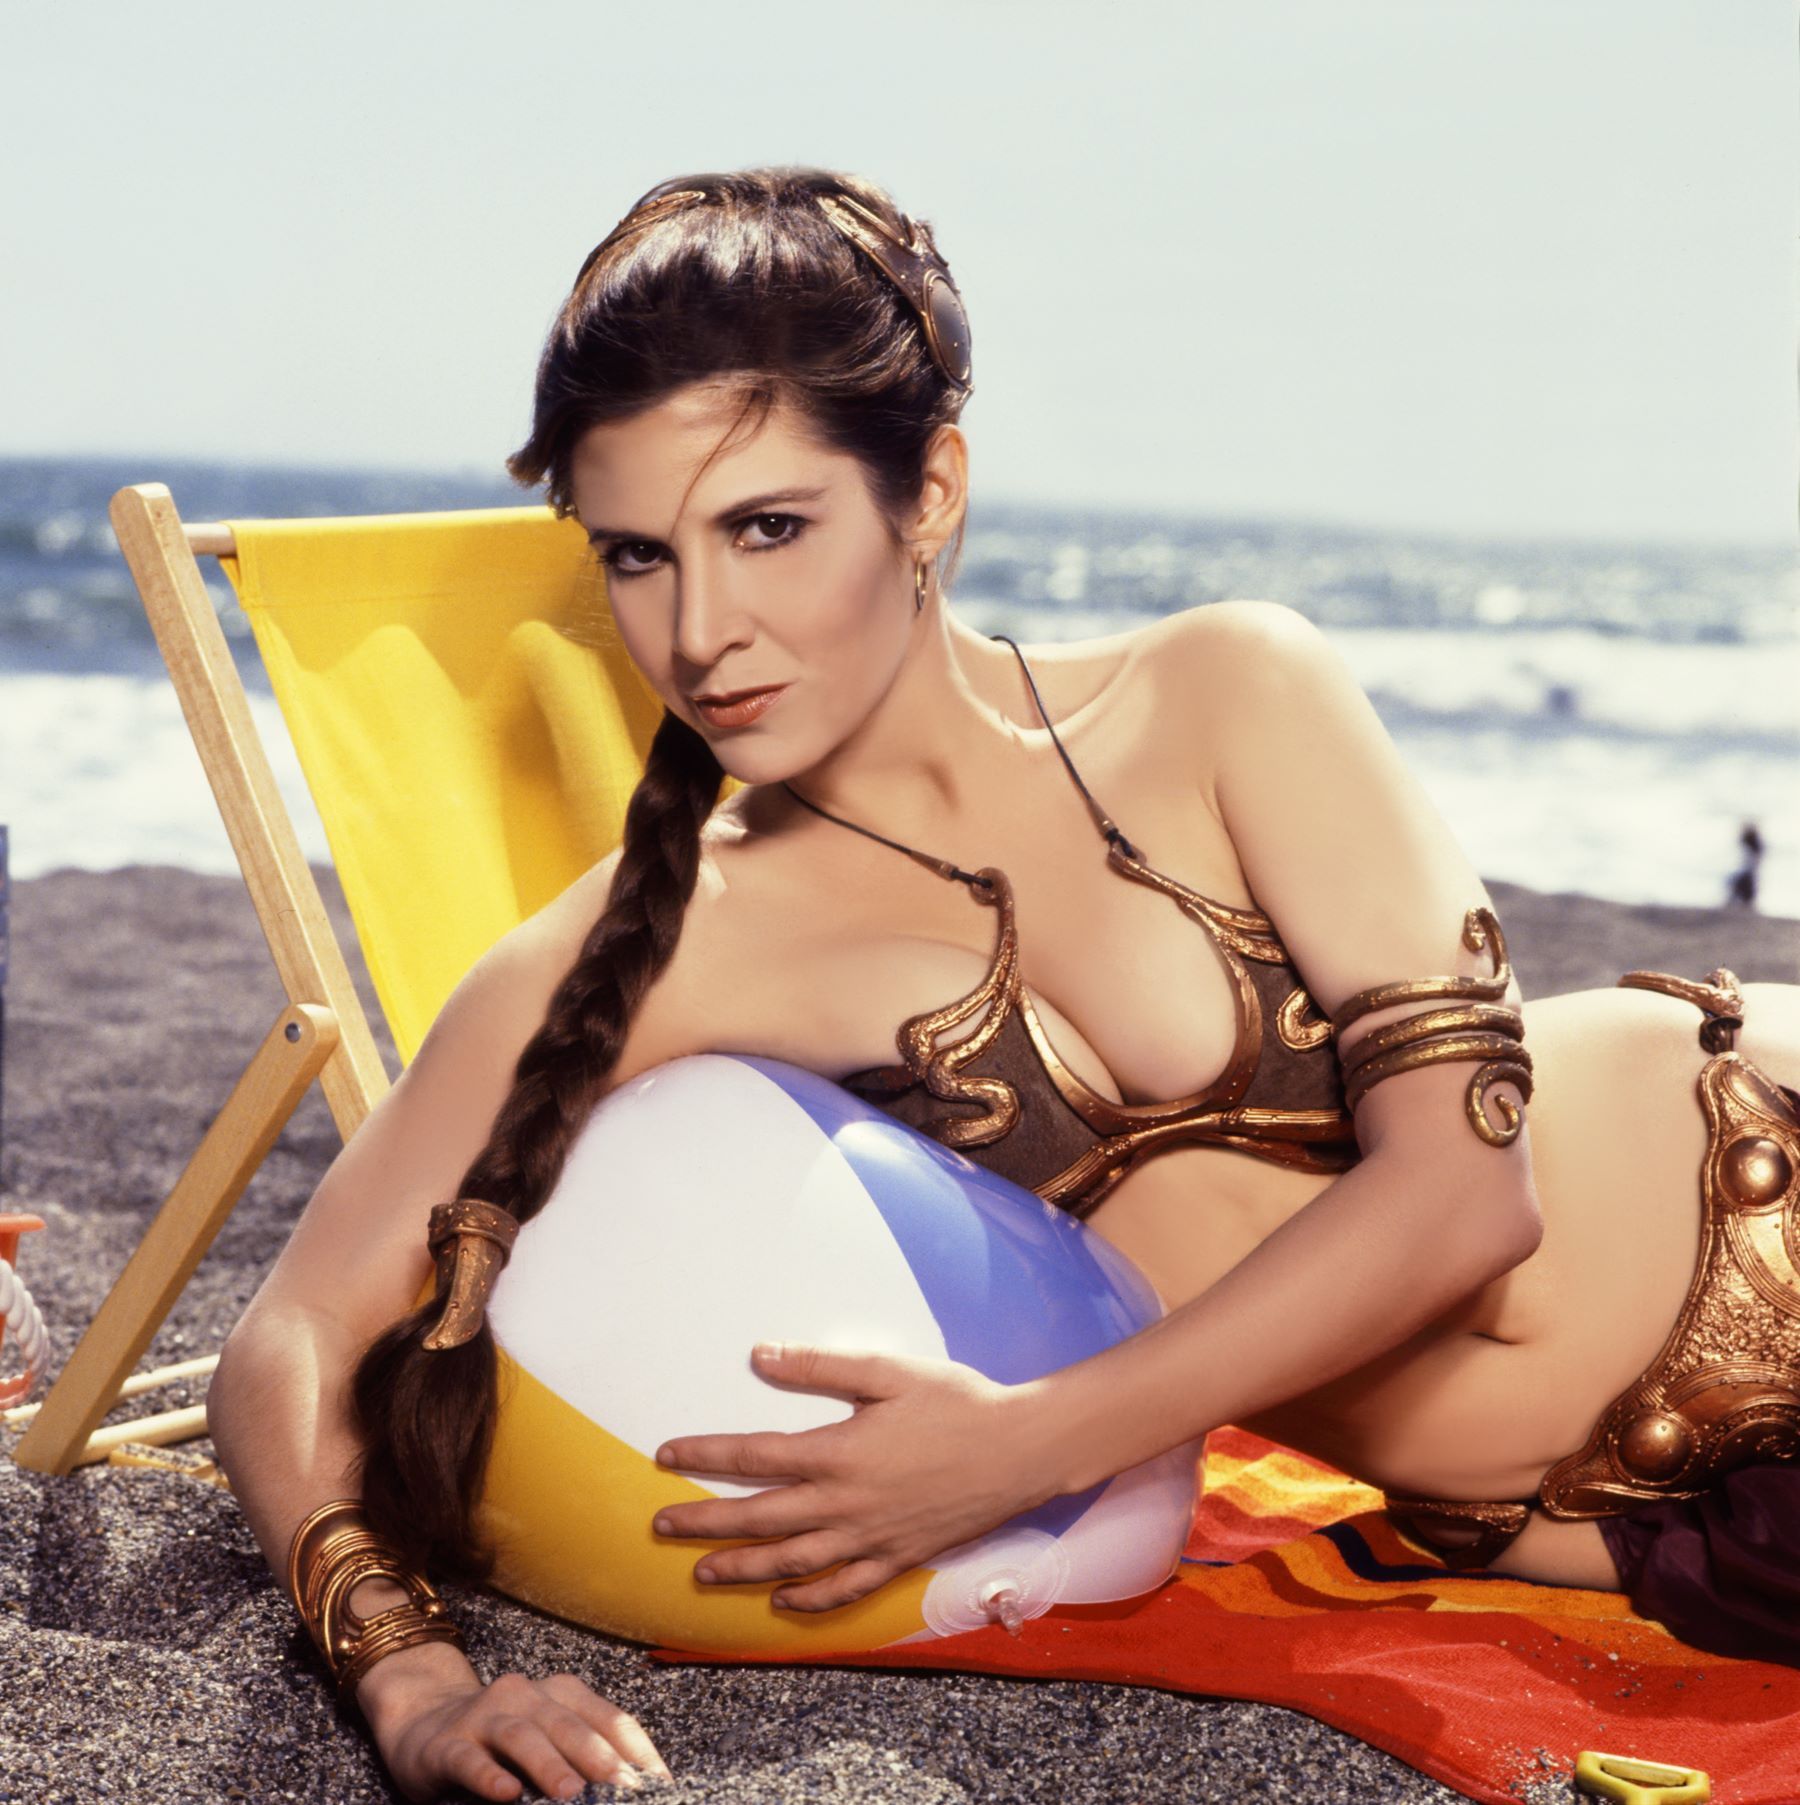 Carrie Fisher as Princess Leia from Star Wars in a gold bikini with an inflatable beach ball